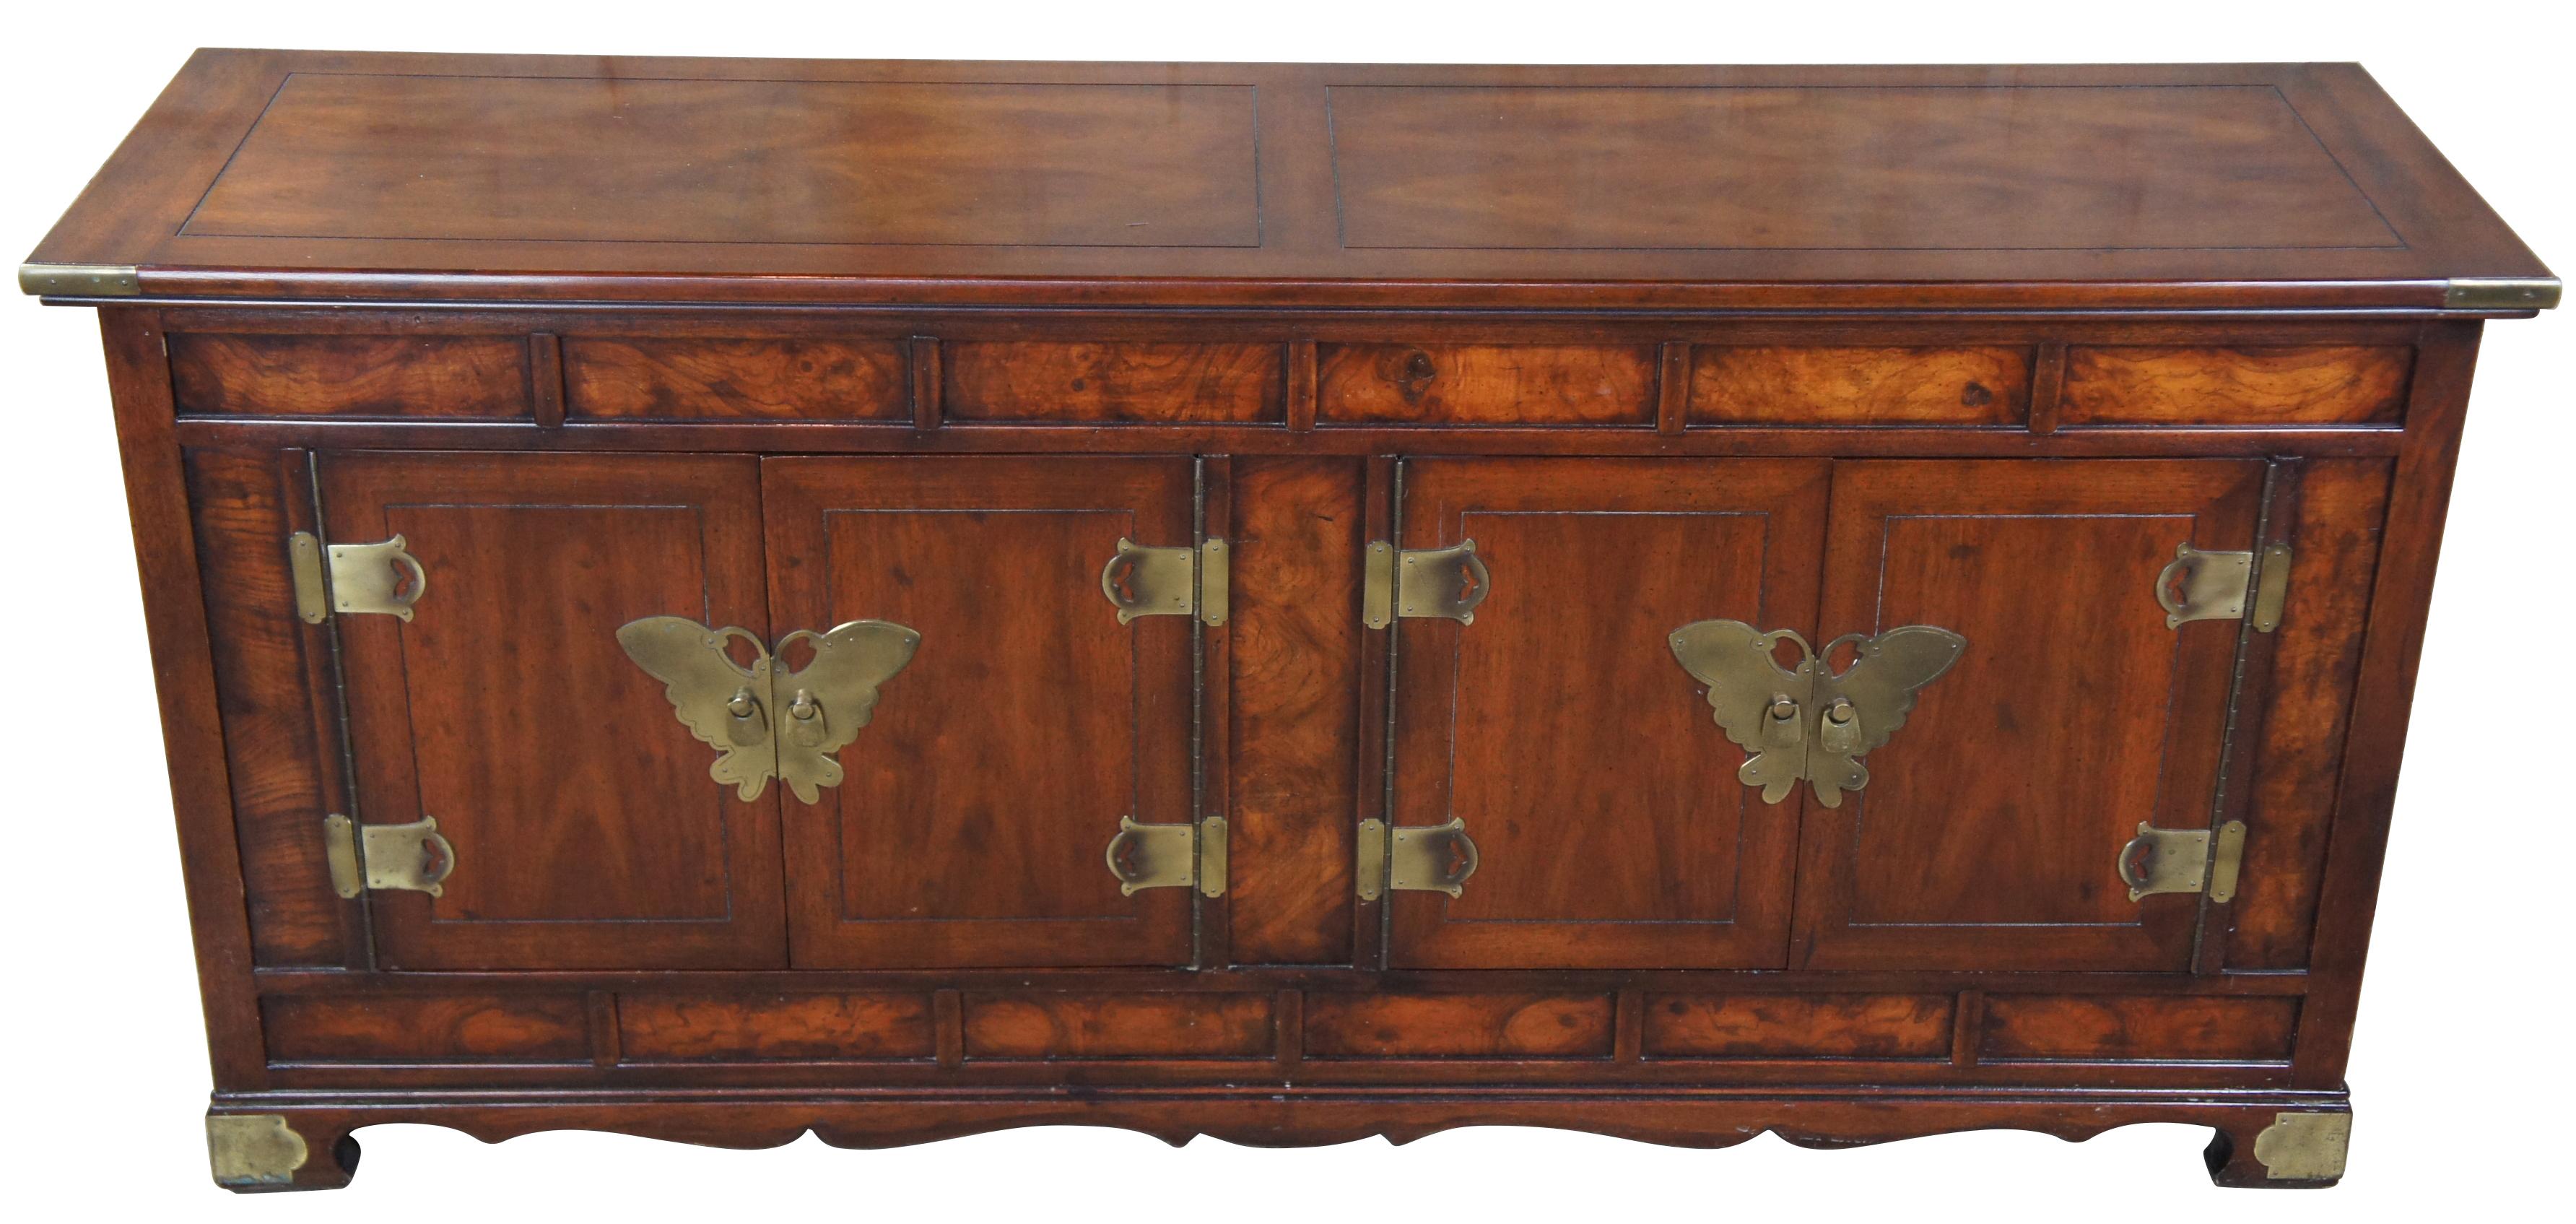 Circa 1980s Henredon Butterfly cabinet. Features campaign styling with burled panels, brass mounts, and brass butterfly hardware along the doors. The top is neatly designed with a matchbook veneer mirroring the wings of the butterfly.
        